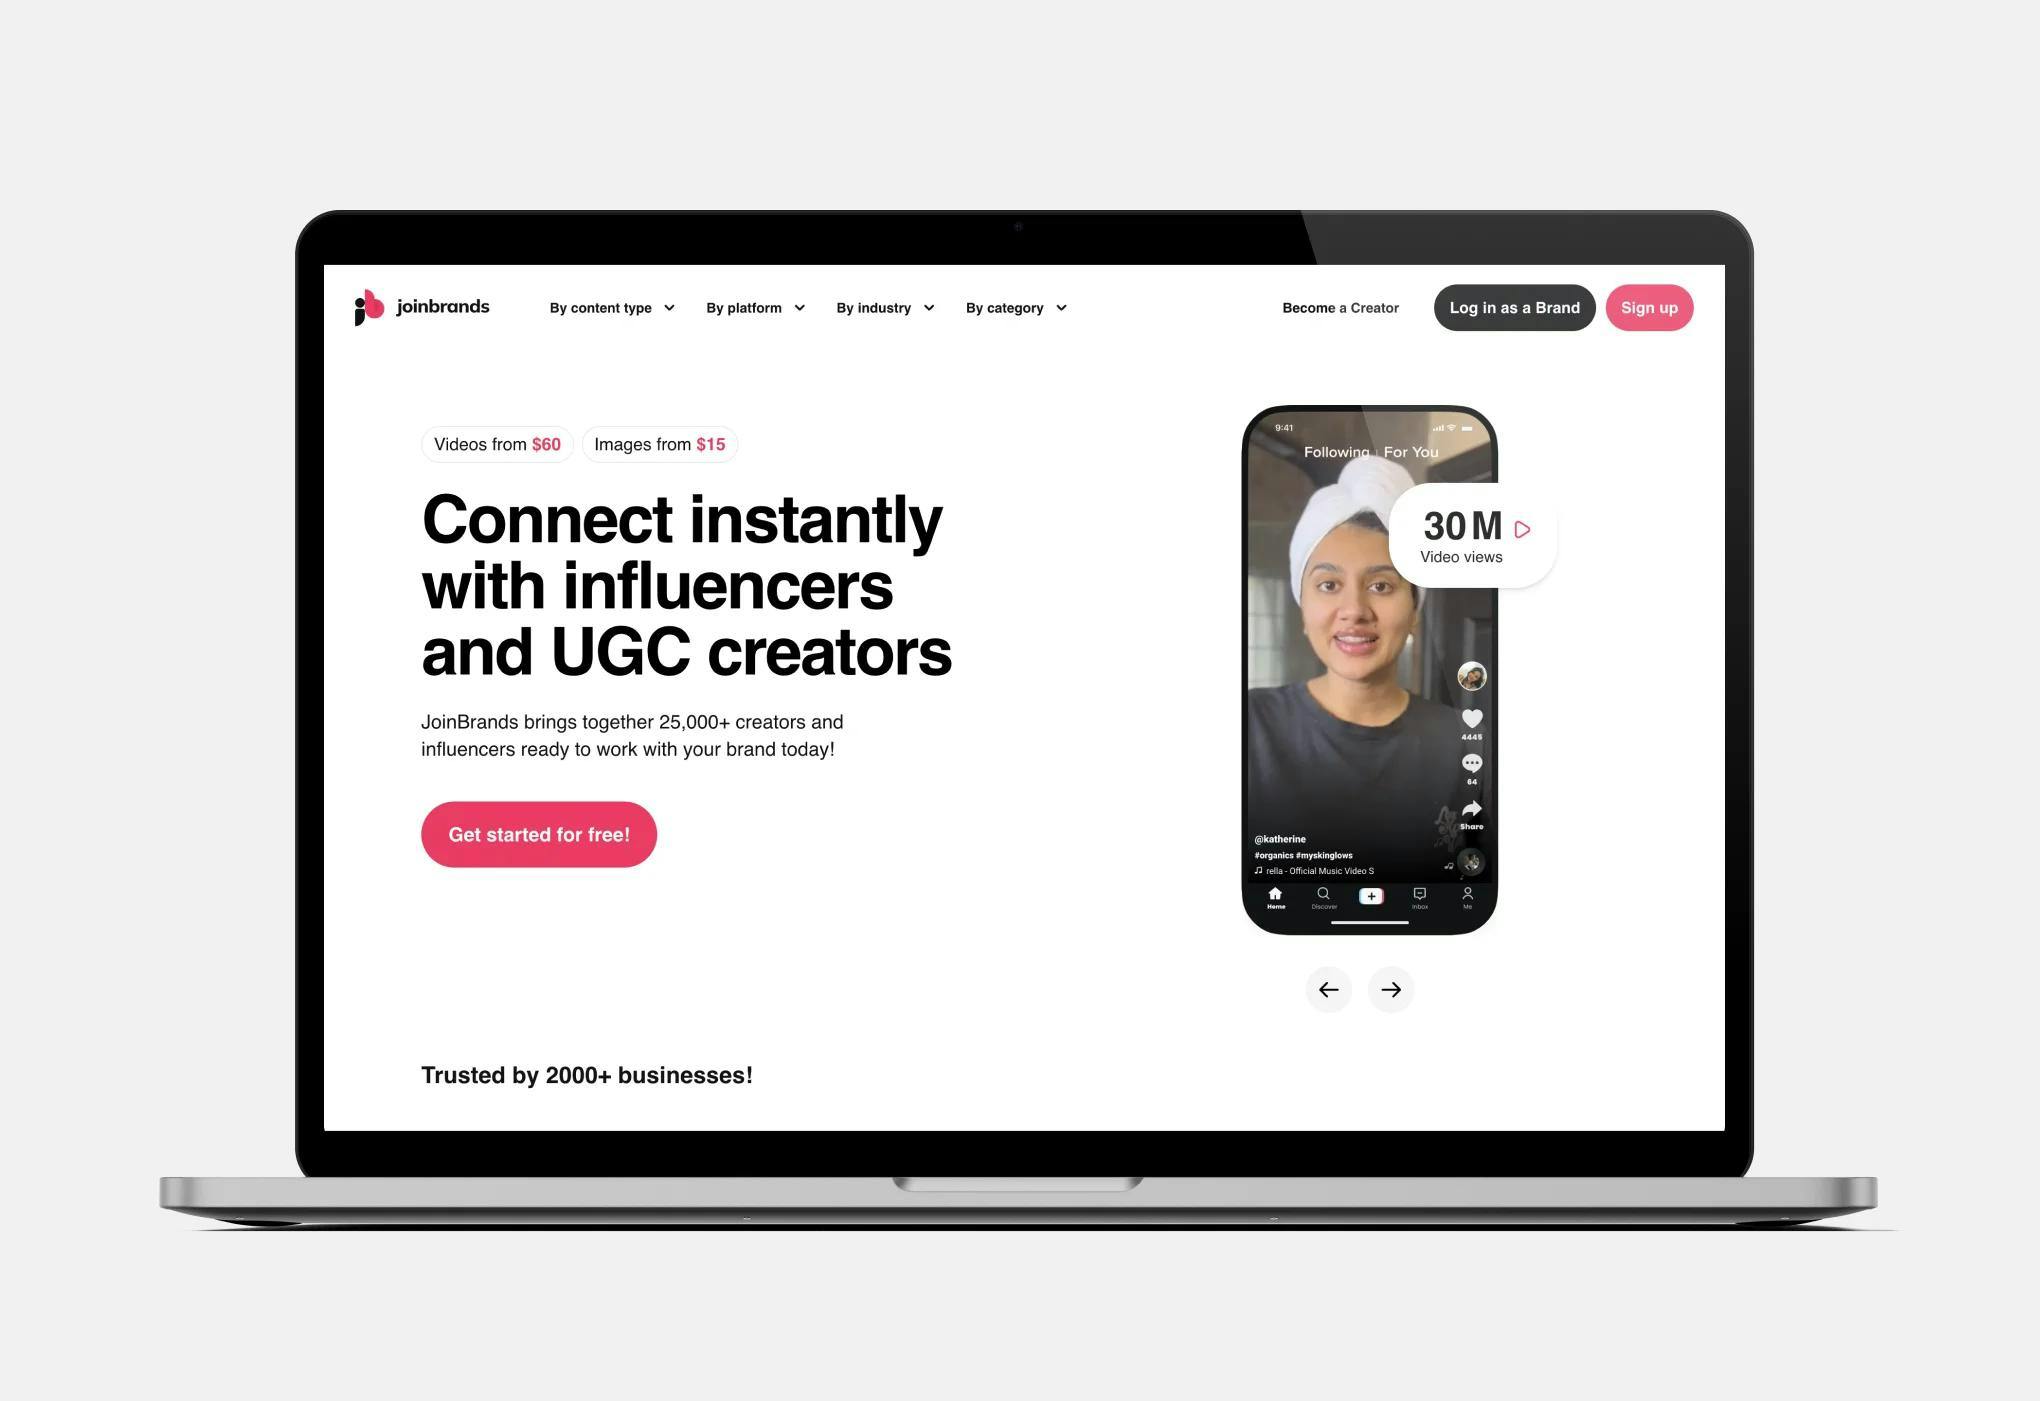 The homage of Joinbrands, which connects brands with influencers and UGC creators instantly.